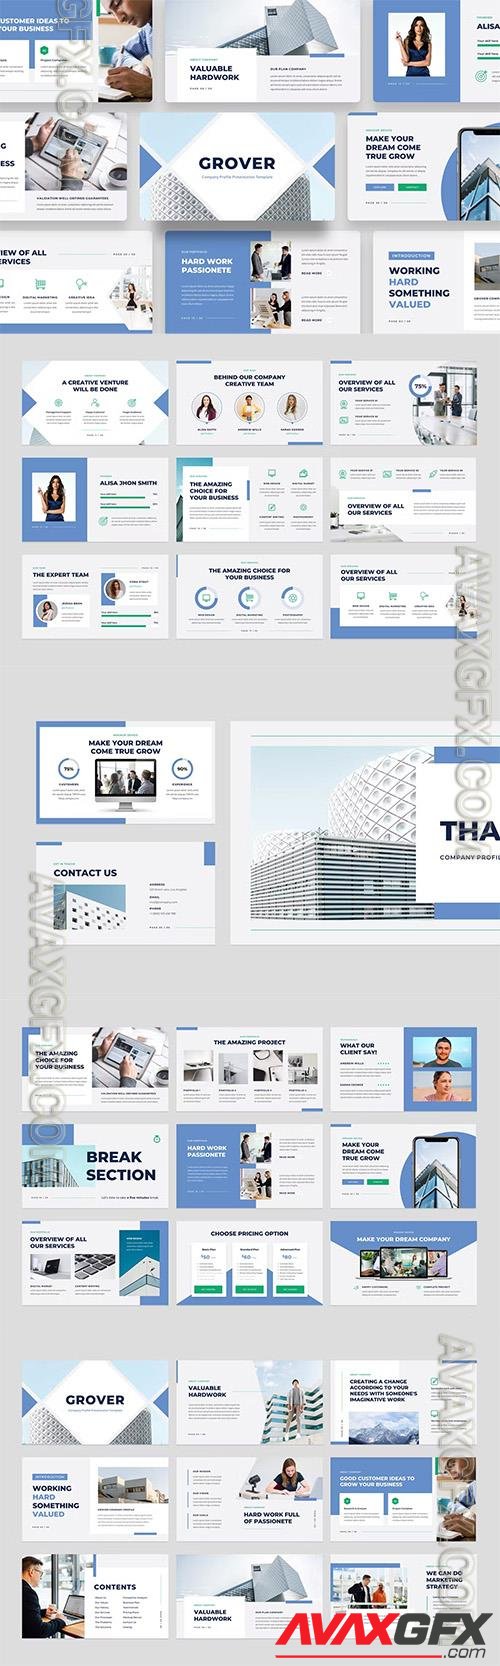 Grover - Company Profile Powerpoint, Keynote and Google Slides Templates